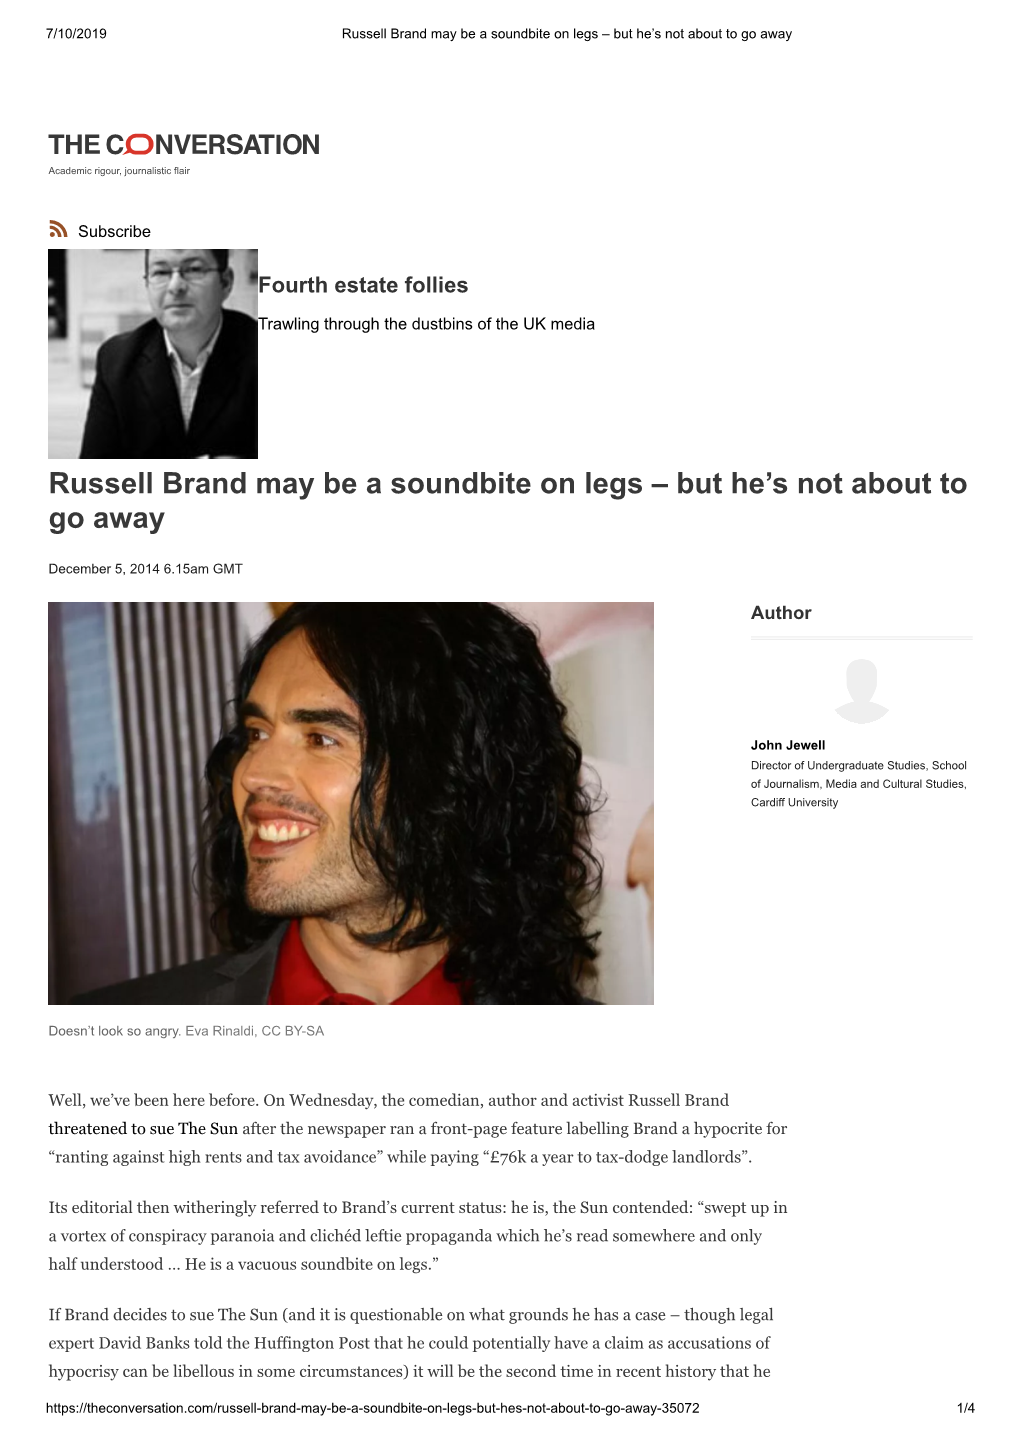 Russell Brand May Be a Soundbite on Legs – but He’S Not About to Go Away